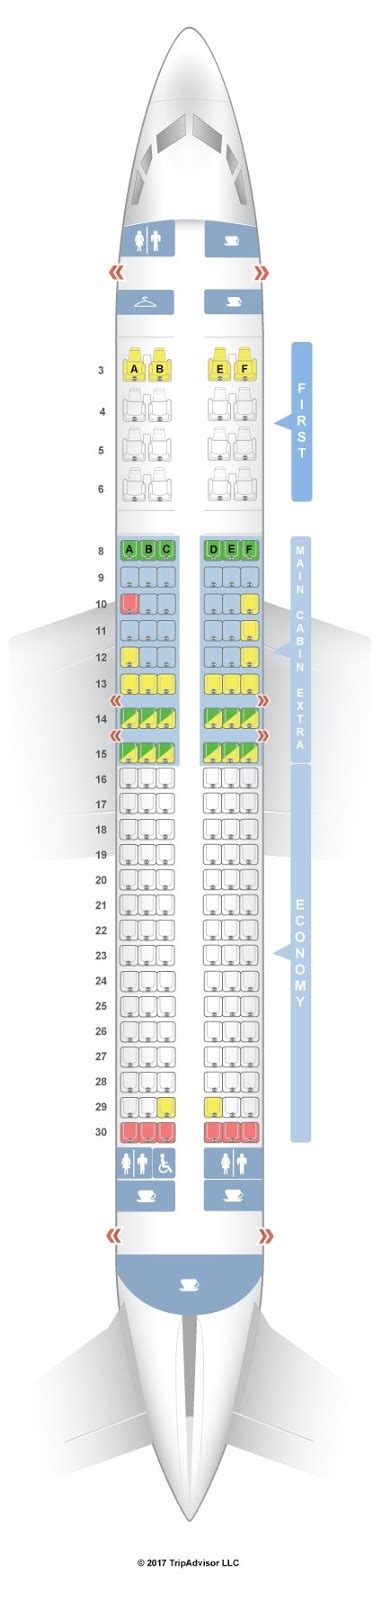 Pitch 37". . American airlines seat map